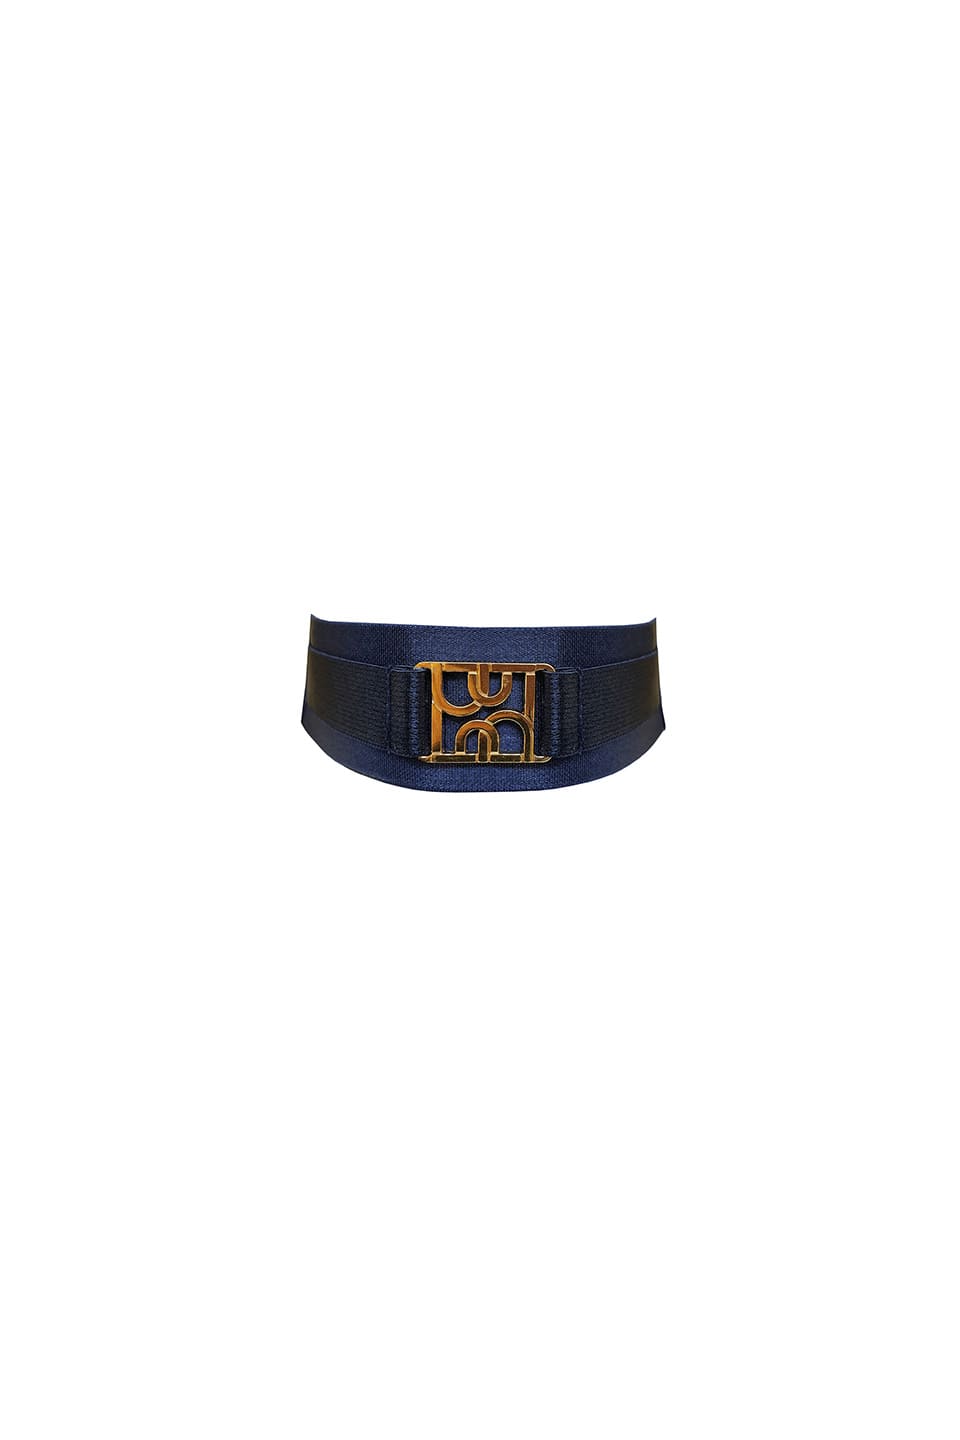 Thumbnail for Product gallery 1, Vero Collar Navy Blue